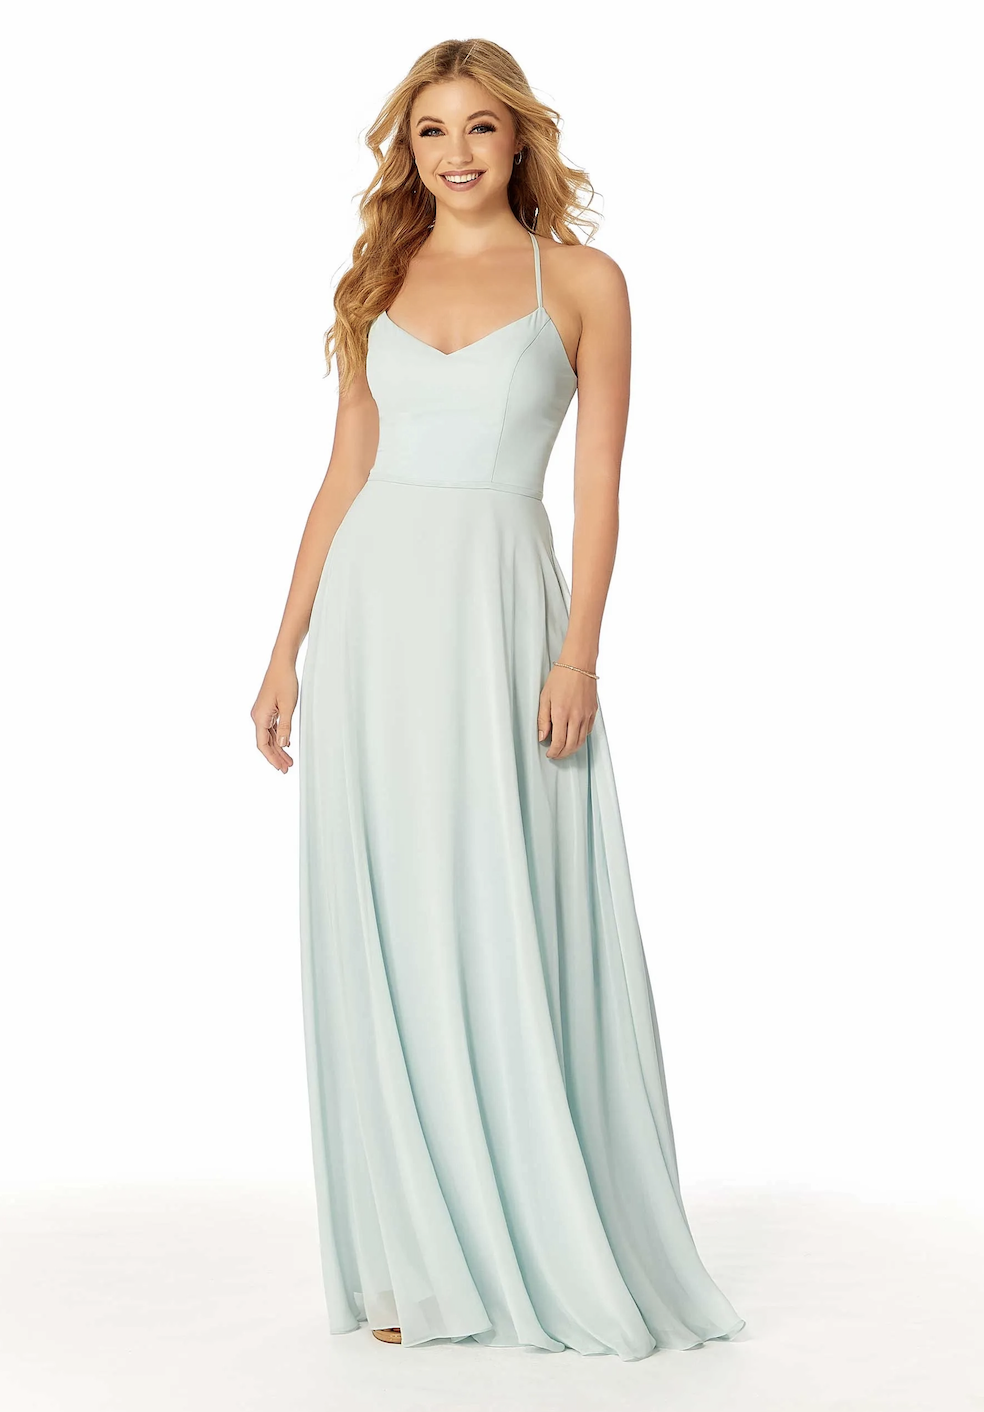 Flare Up Your Bridesmaids with Morilee! Image